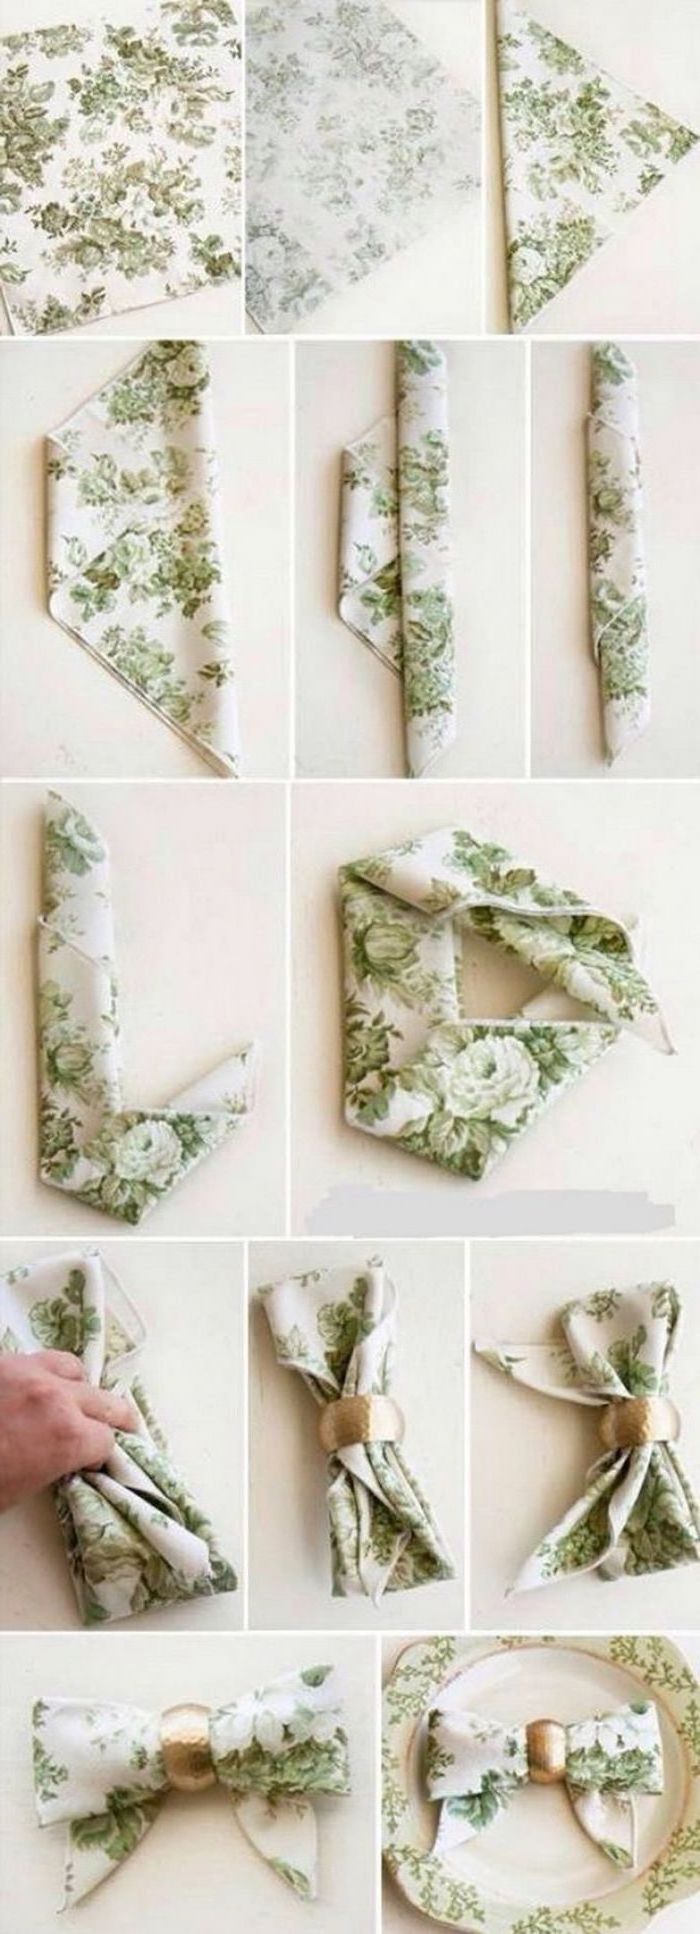 1001 + ideas for Insta-worthy napkin folding techniques and tutorials